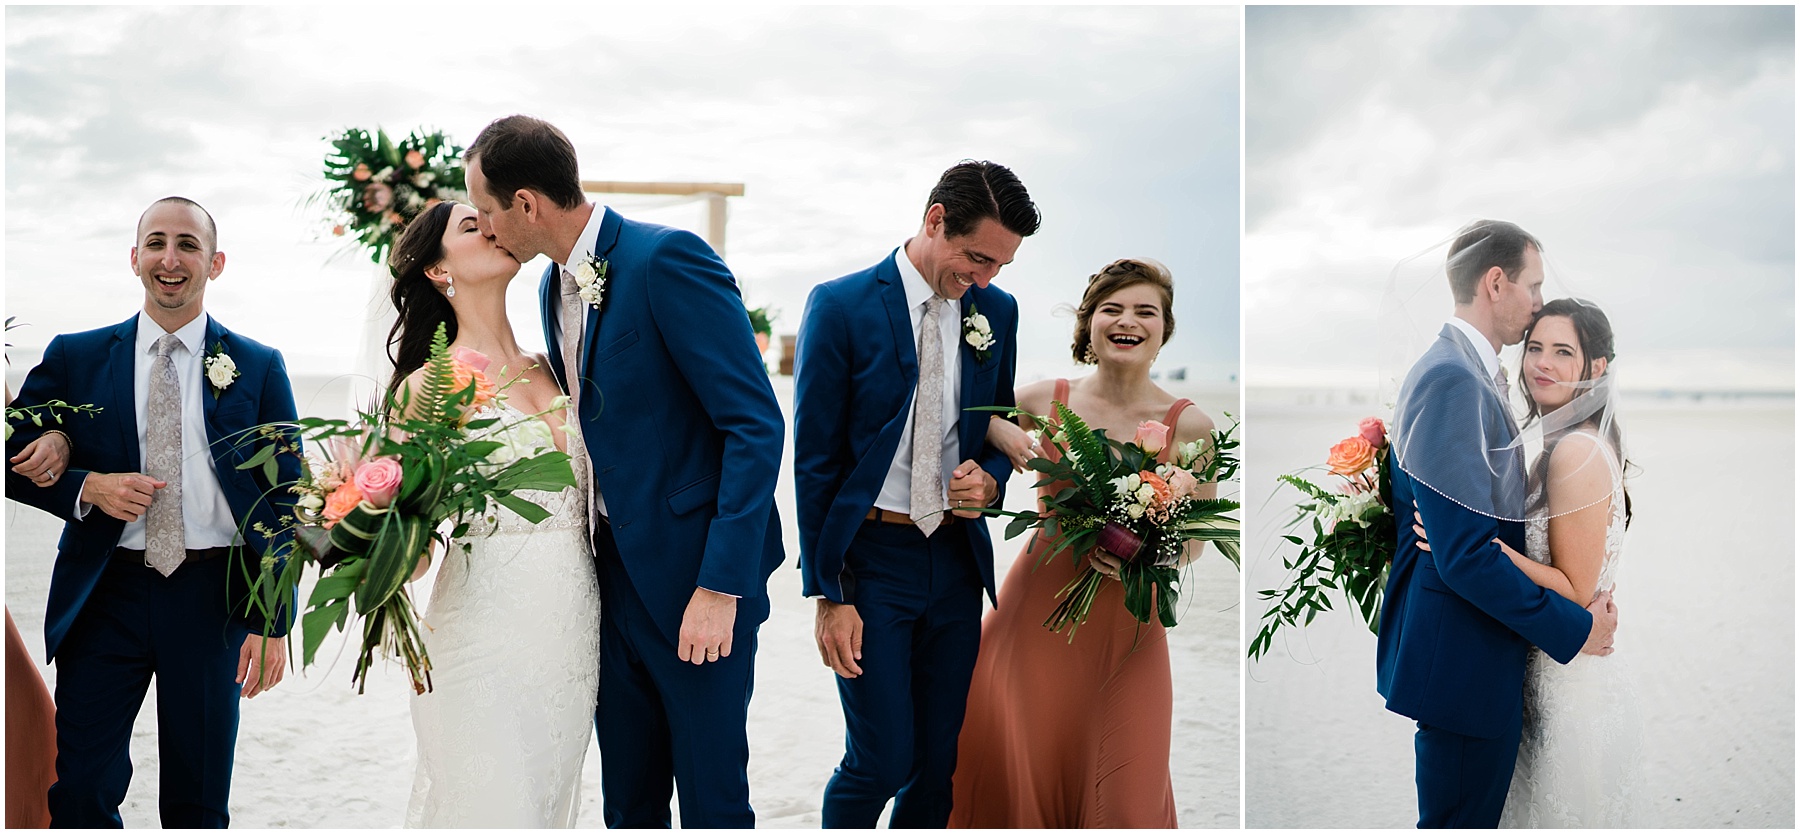 Bridal party celebrates at JW Marriott Marco Island in Florida